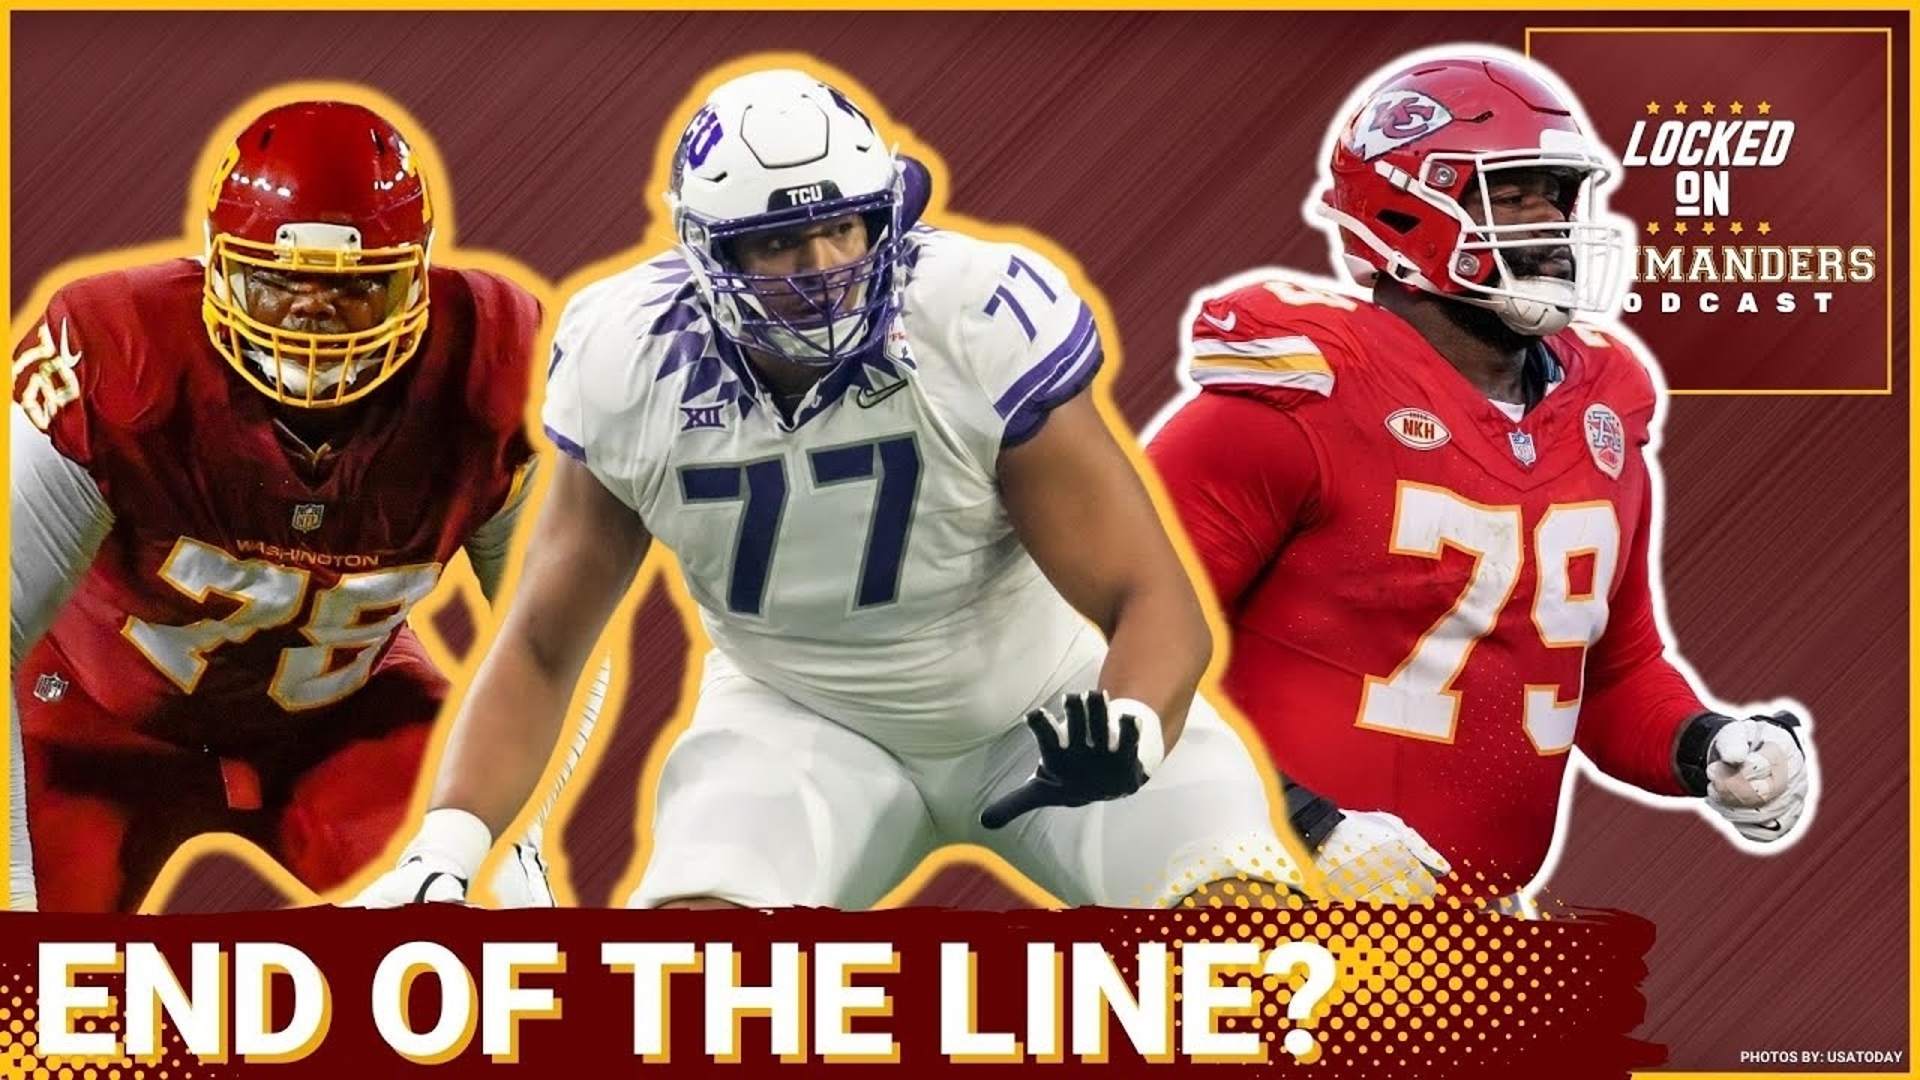 Opening up the Washington Commanders mailbag to discuss the offensive line, veterans who may be on the way out, and championship classes.